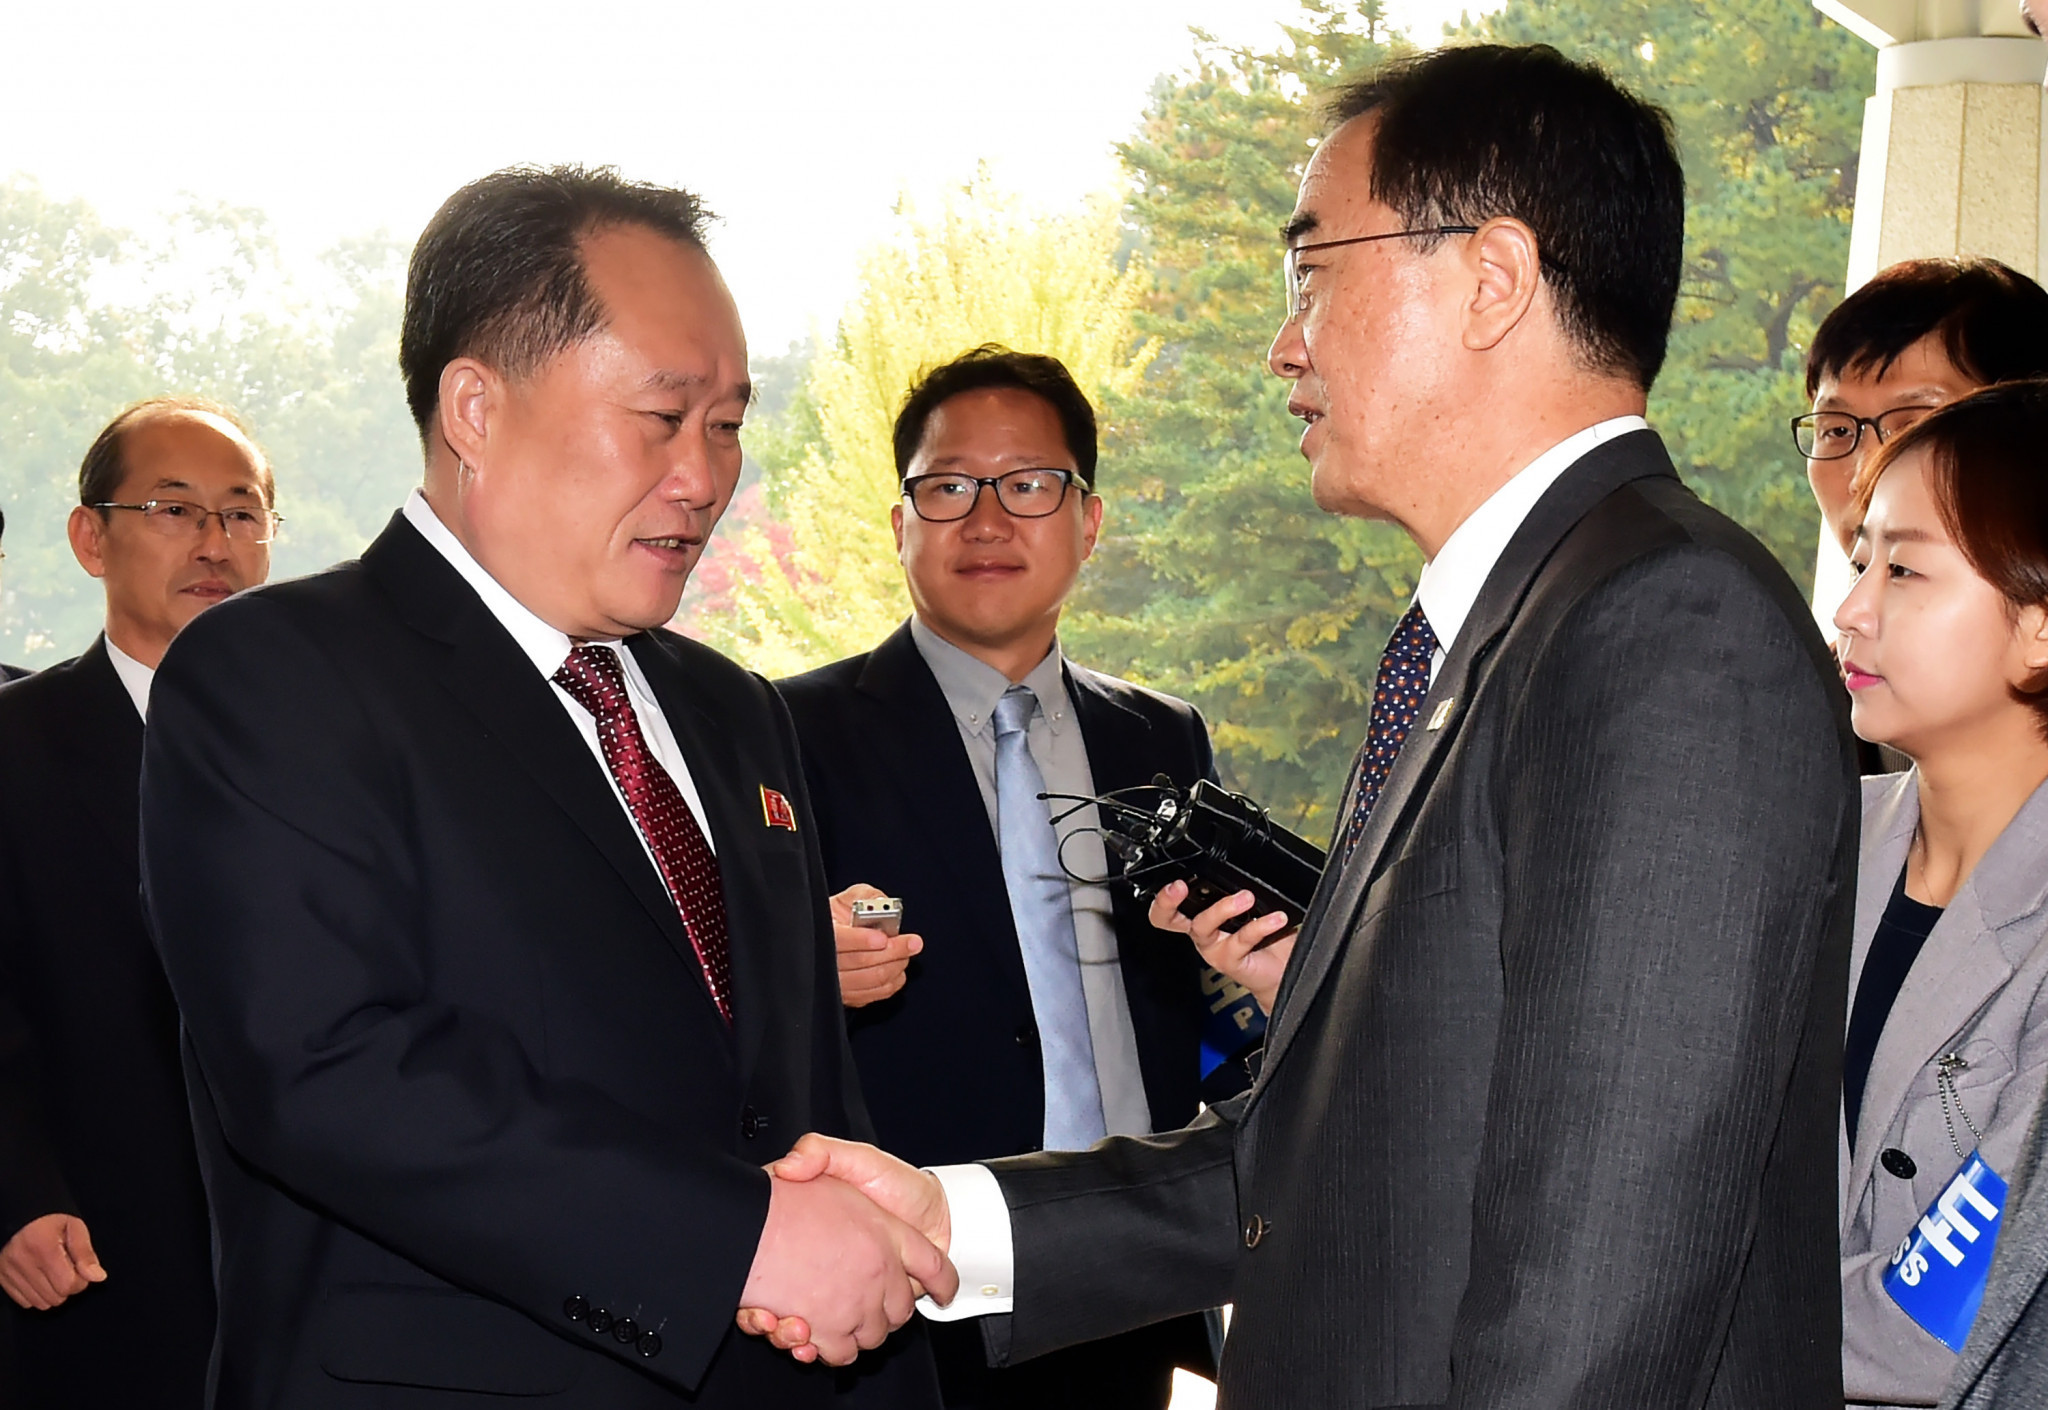 North and South Korea plan further talks on joint 2032 bid and unified Tokyo 2020 team